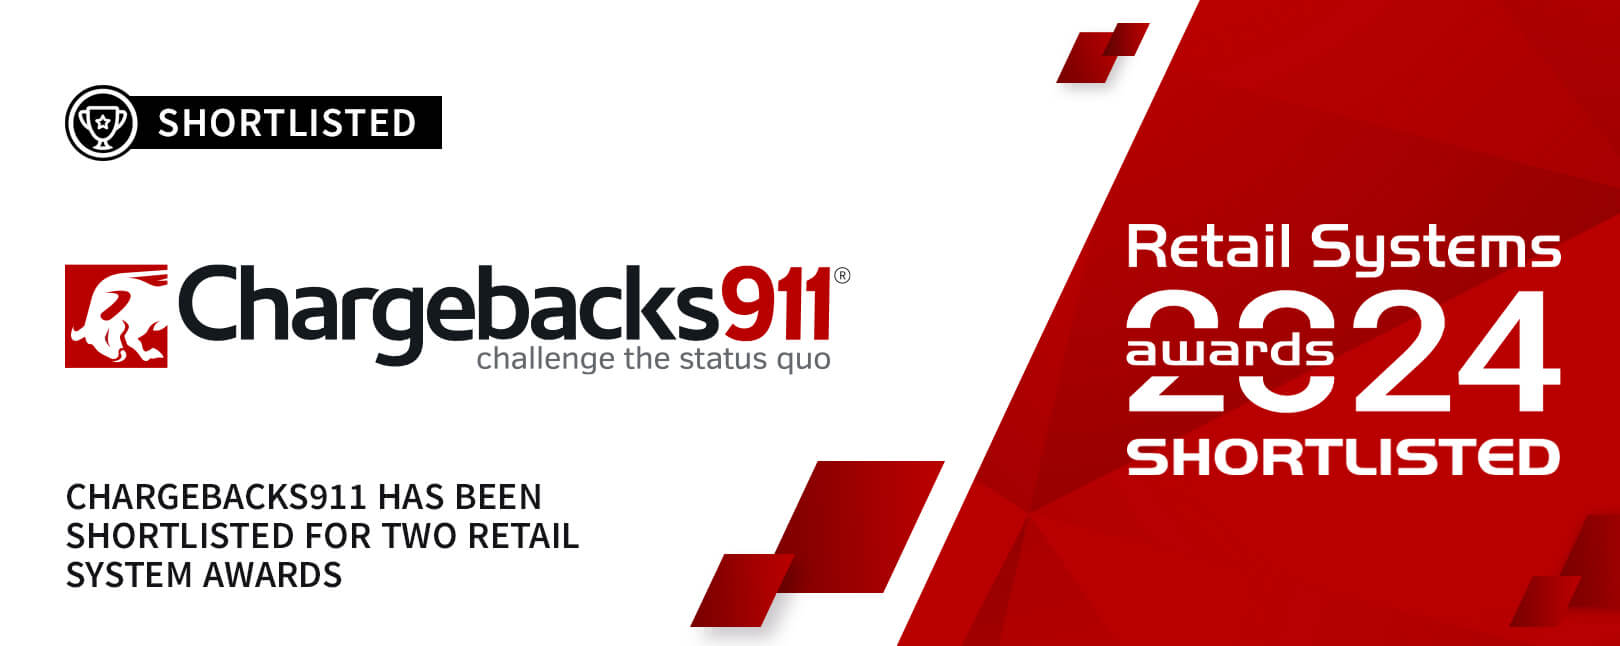 Chargebacks911®: the ‘Data & Analytics Company of the Year’ for 2024!